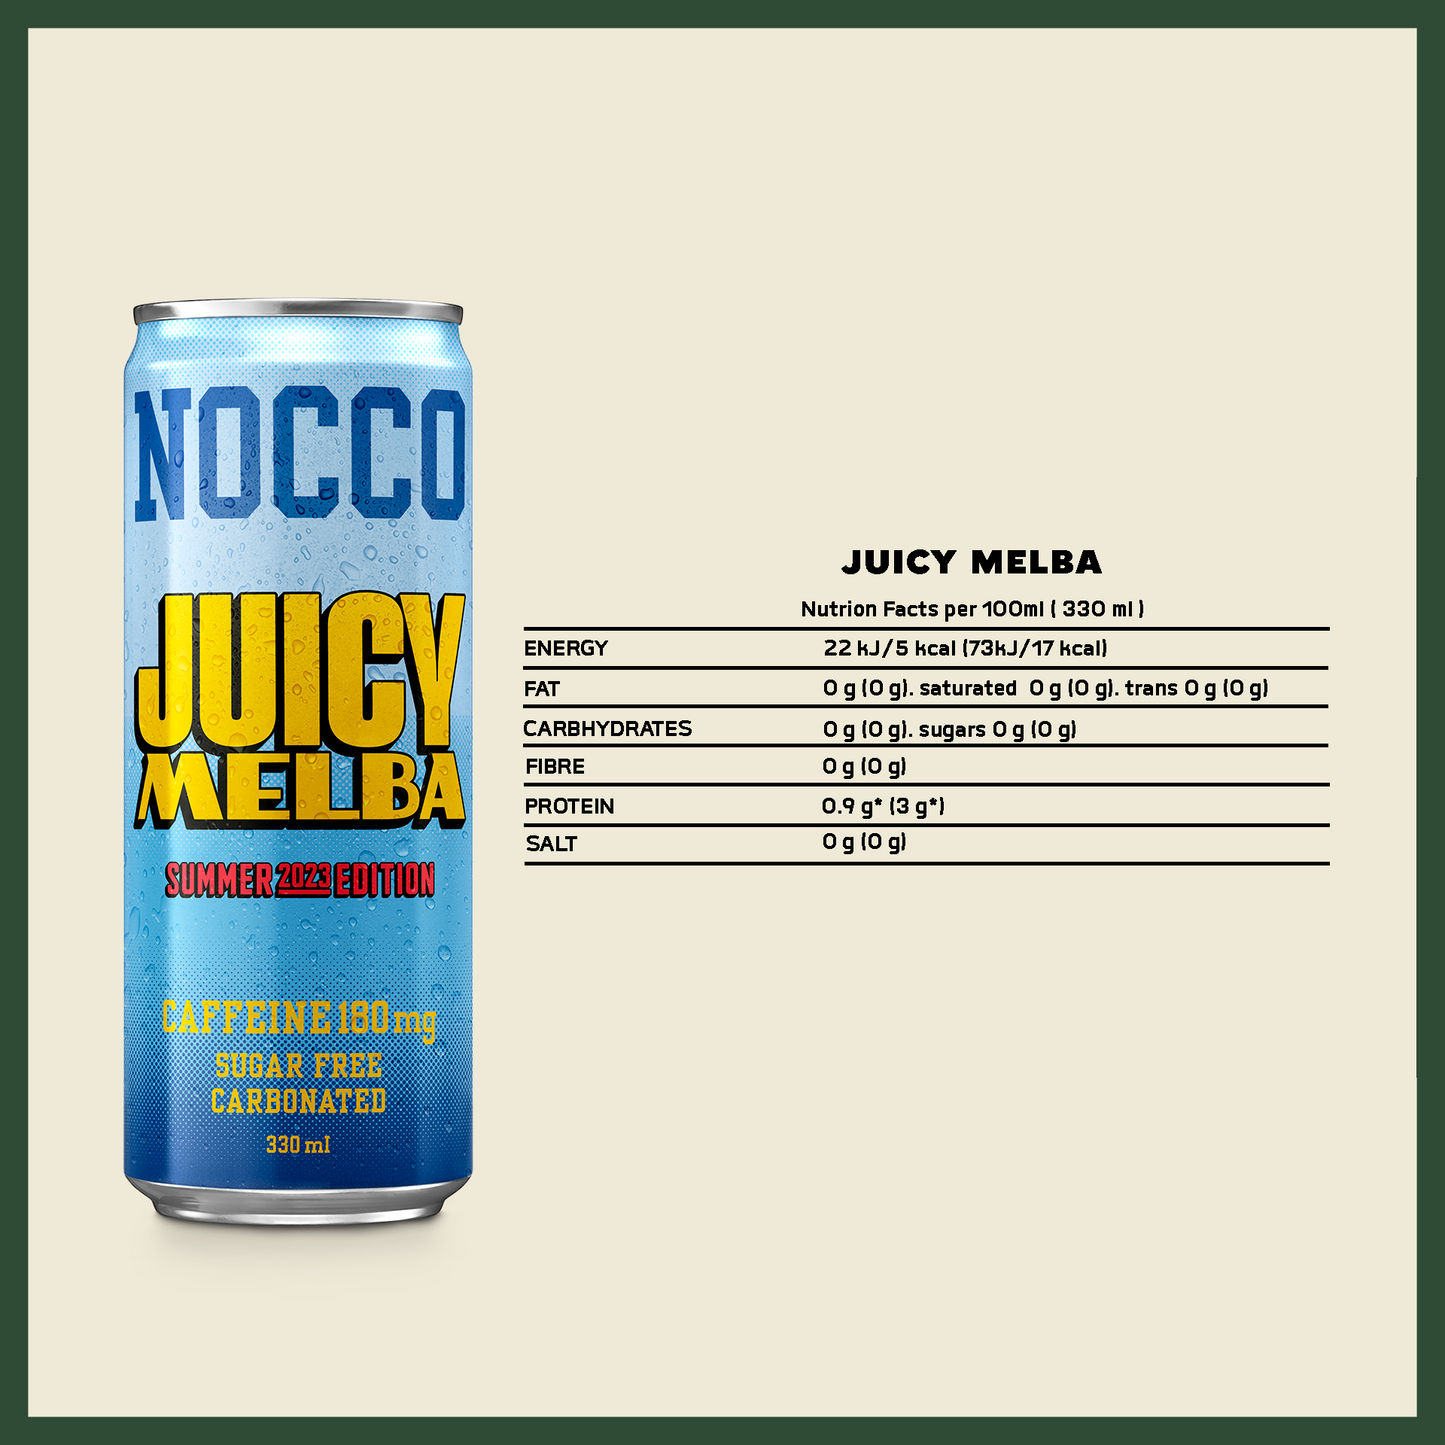 NOCCO BCAA Multi-vitamins Performance Drink - JUICY MELBA (Caffeinated) 3 Cans